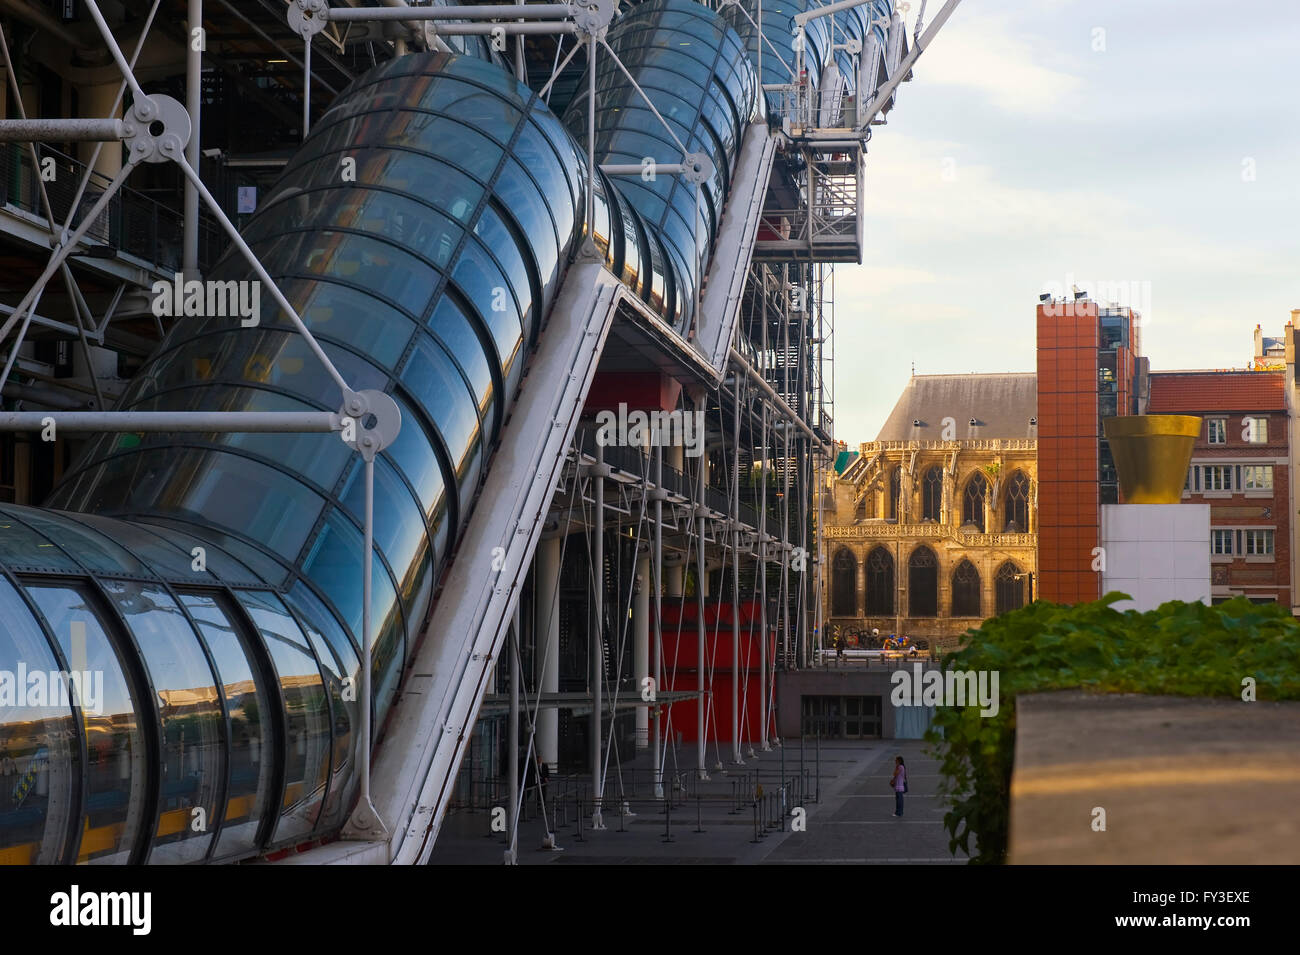 Pompidou Center or Centre Georges Pompidou also known as Beaubourg, Paris, France Stock Photo